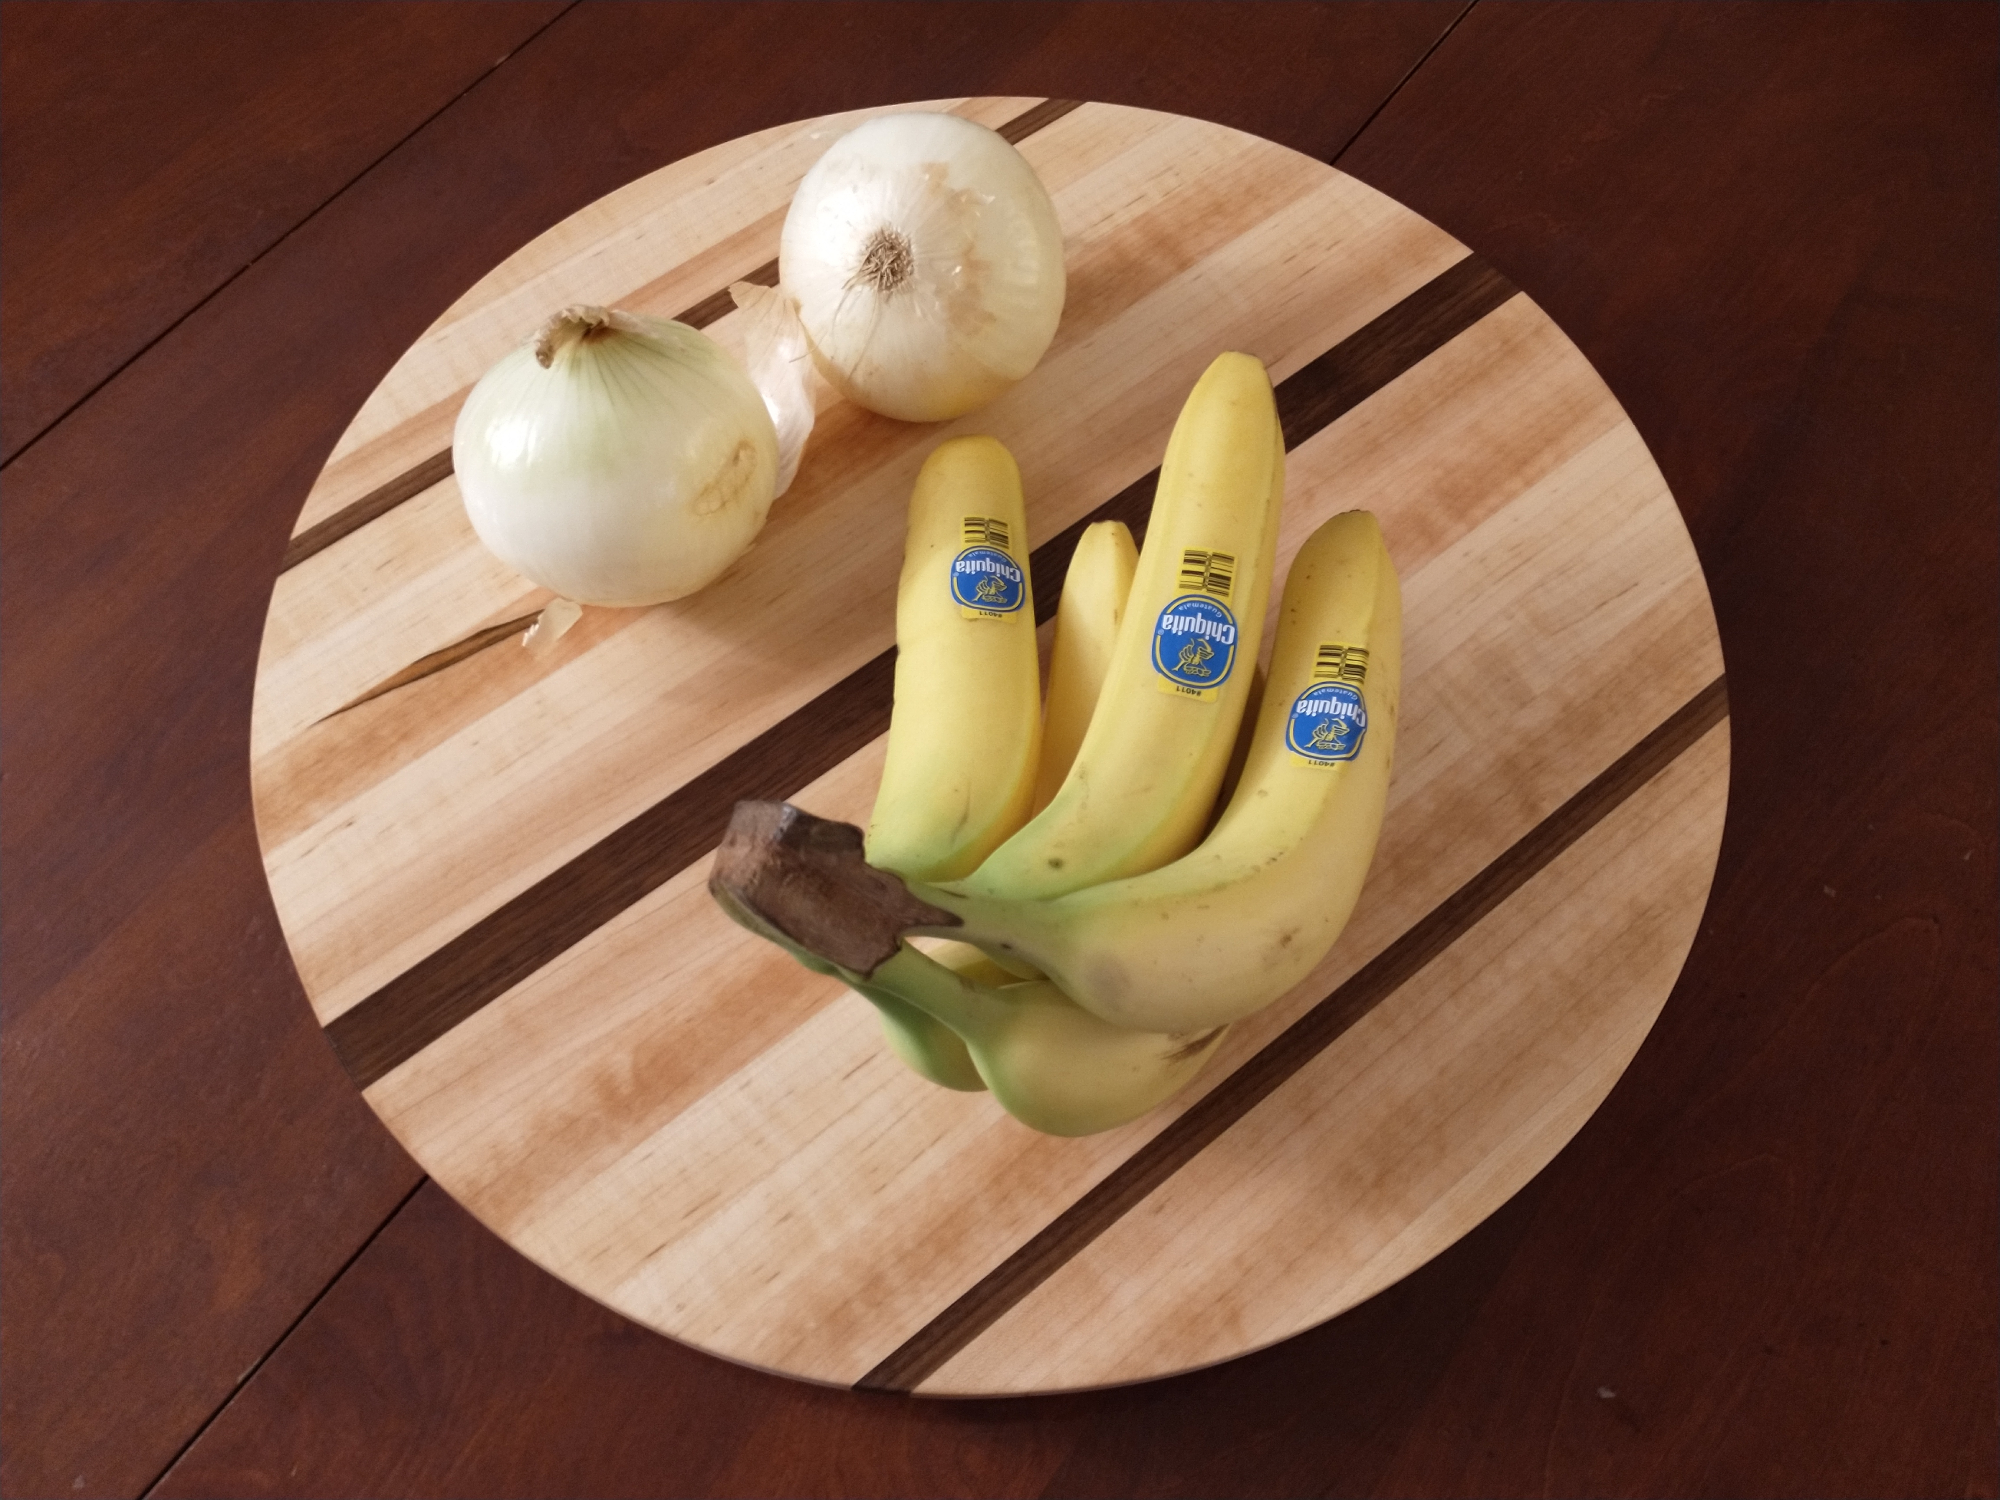 A DIY Lazy Susan for a tabletop, on top of a dark wooden table. The Lazy Susan has a bunch of bananas and two white onions on it.